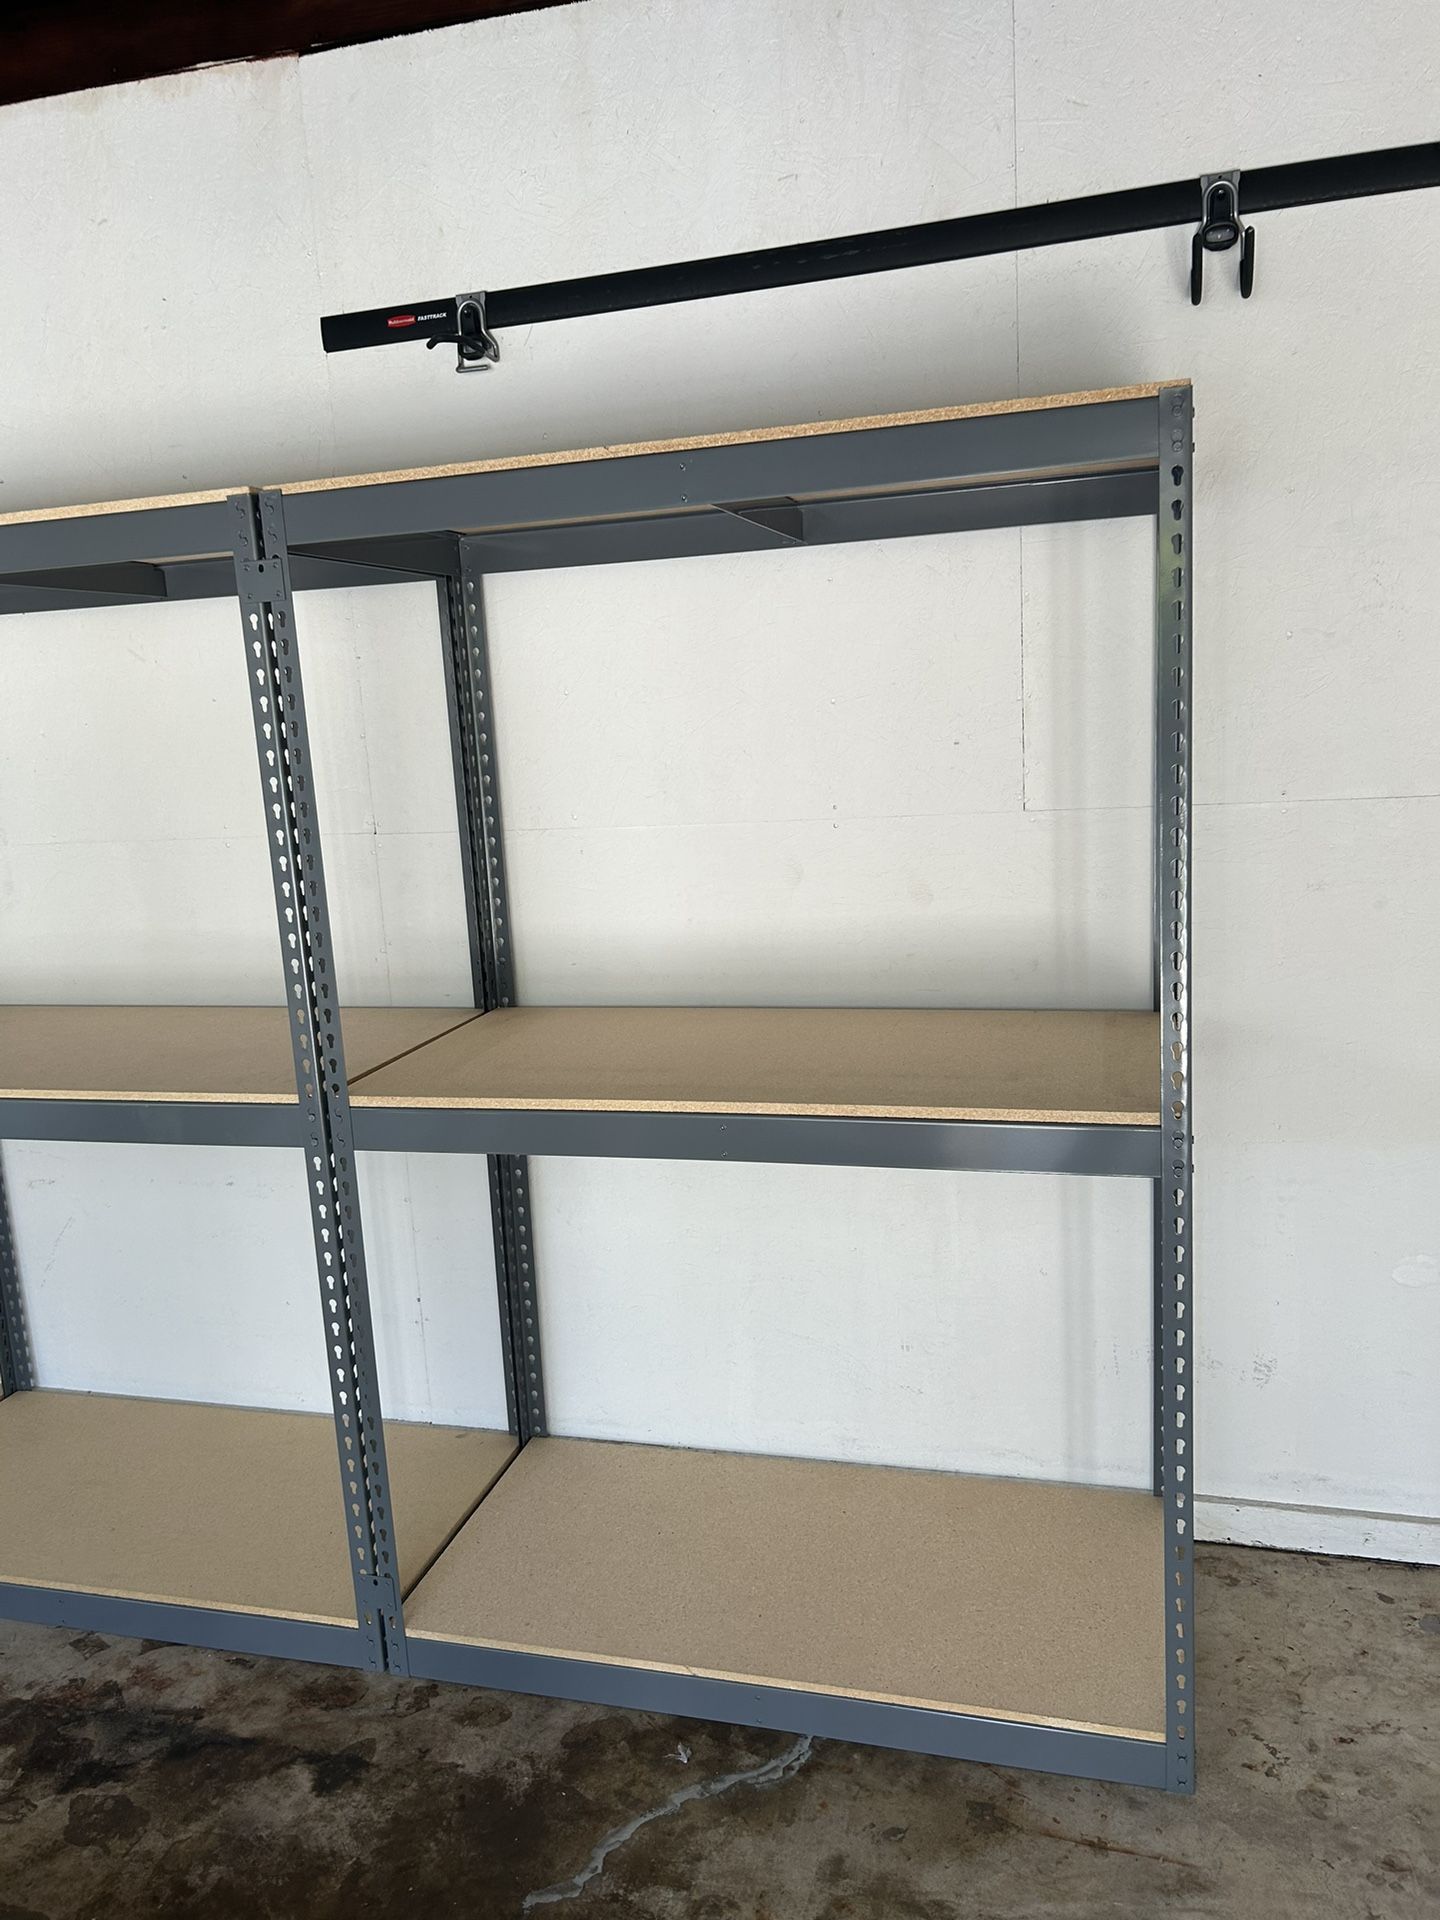 Garage Shelving 48 in W x 24 in D New Industrial Boltless Warehouse Racks Stronger Than Homedpot Lowes Delivery Available